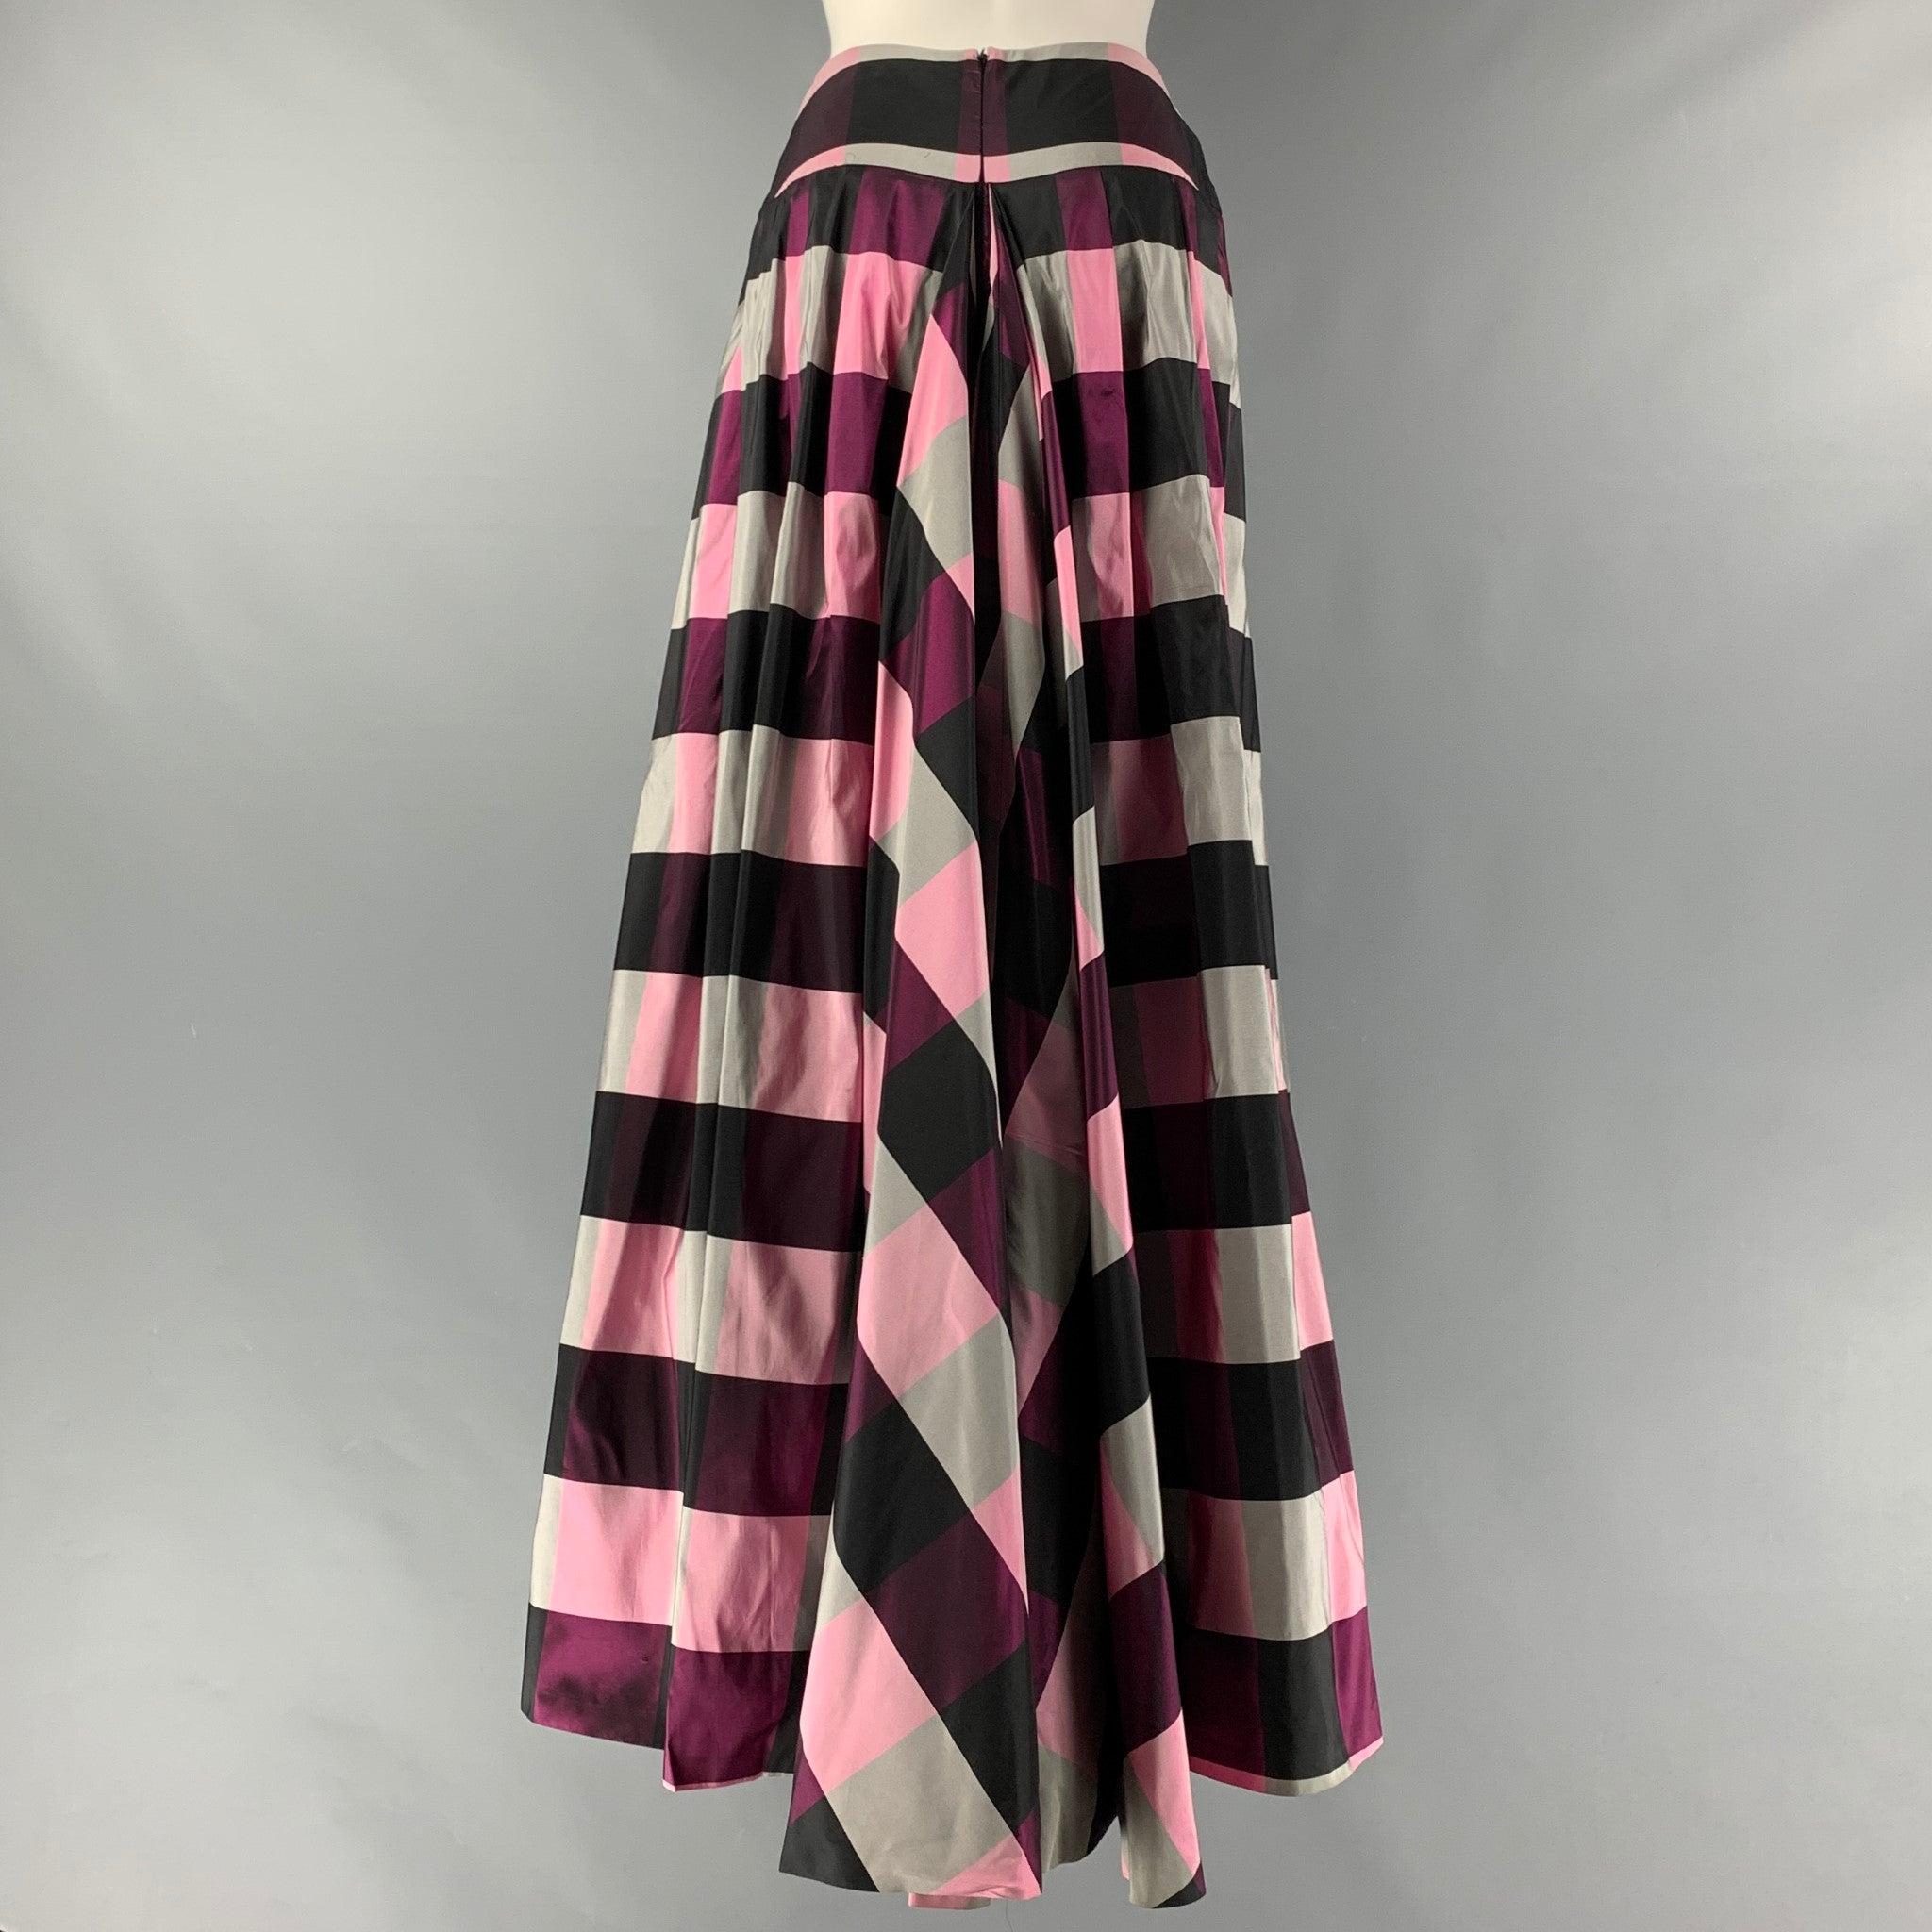 BALMAIN long skirt comes in black, grey, pink and purple checkered silk taffeta featuring high waist, train style, and a center back invisible zip up closure. Made in Italy.Good Pre-Owned Condition. Moderate Marks. As-Is. 

Marked:   36